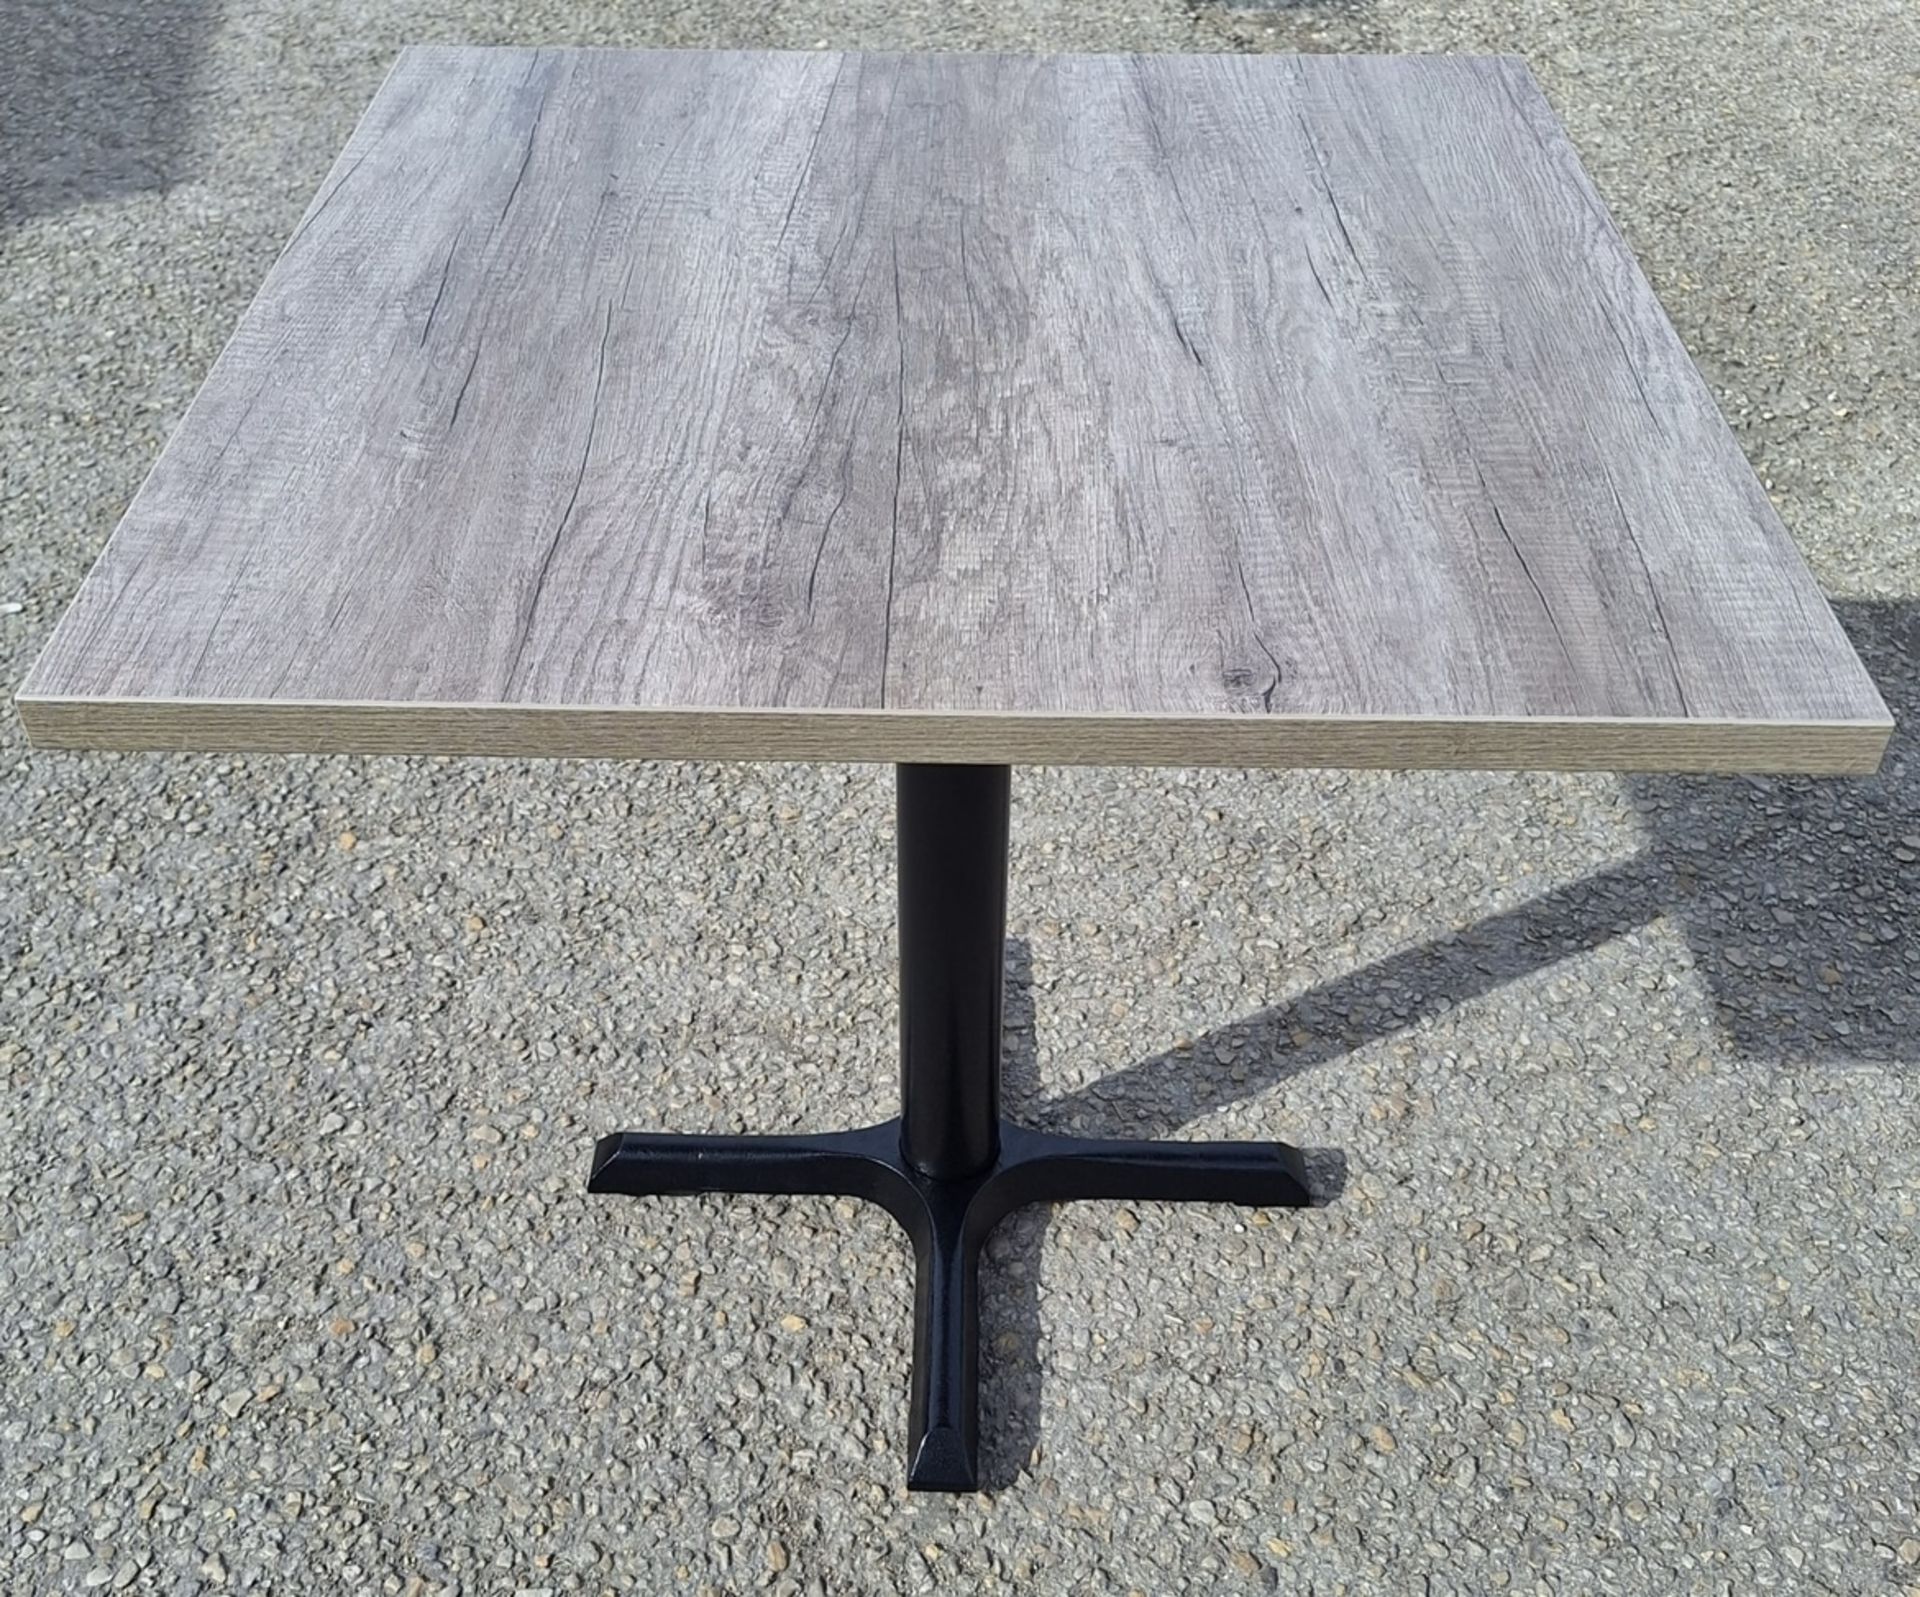 BRAND NEW X6 RESTAURANT/BAR COMPLETE TABLES GREY NEBRASKA OAK STYLE SOLID BASE AND TOP IS 70X70